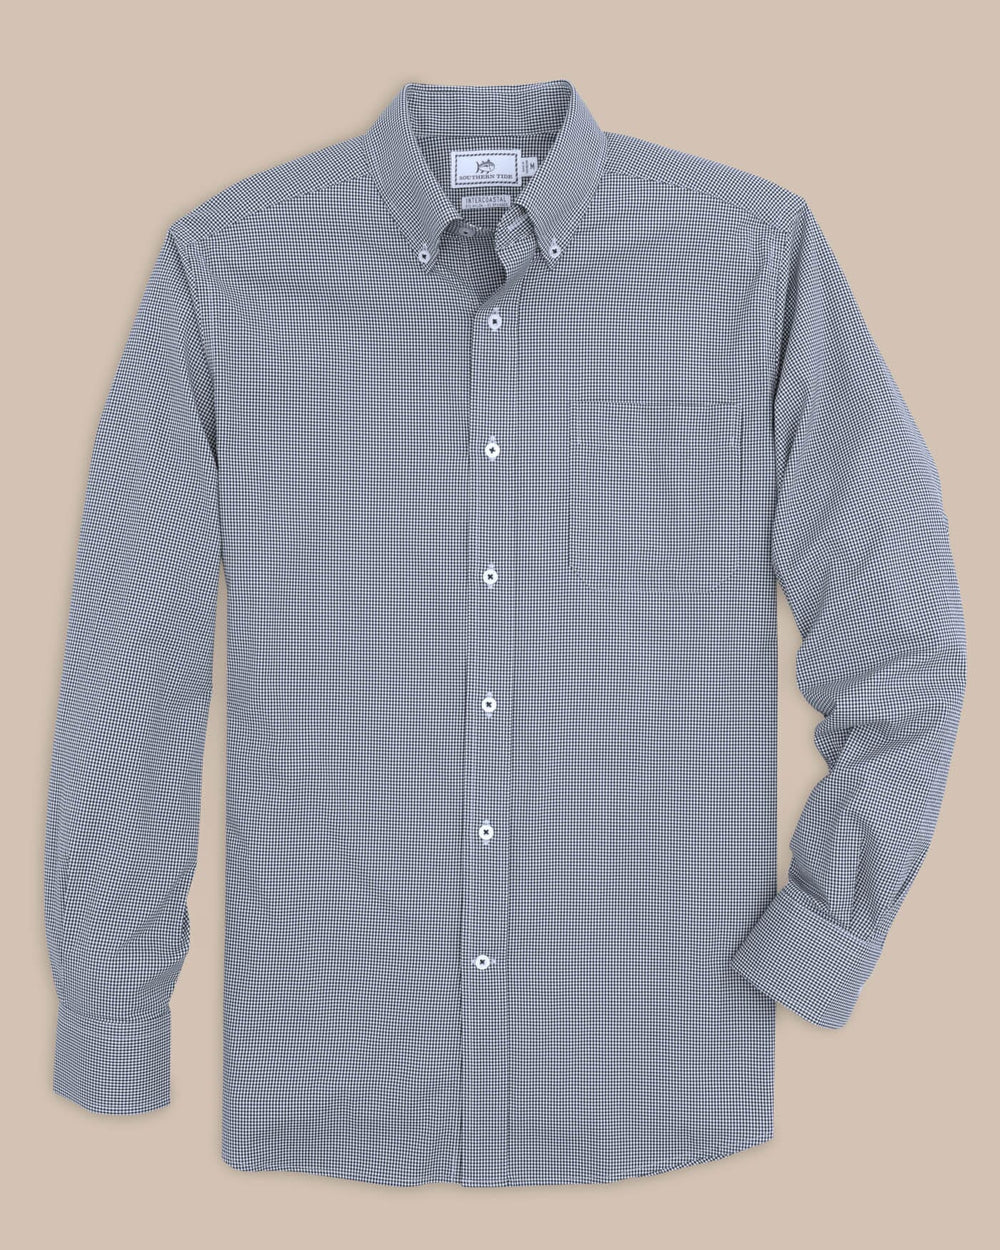 The front view of the Southern Tide Team Colors Gingham Intercoastal Sport Shirt by Southern Tide - Navy